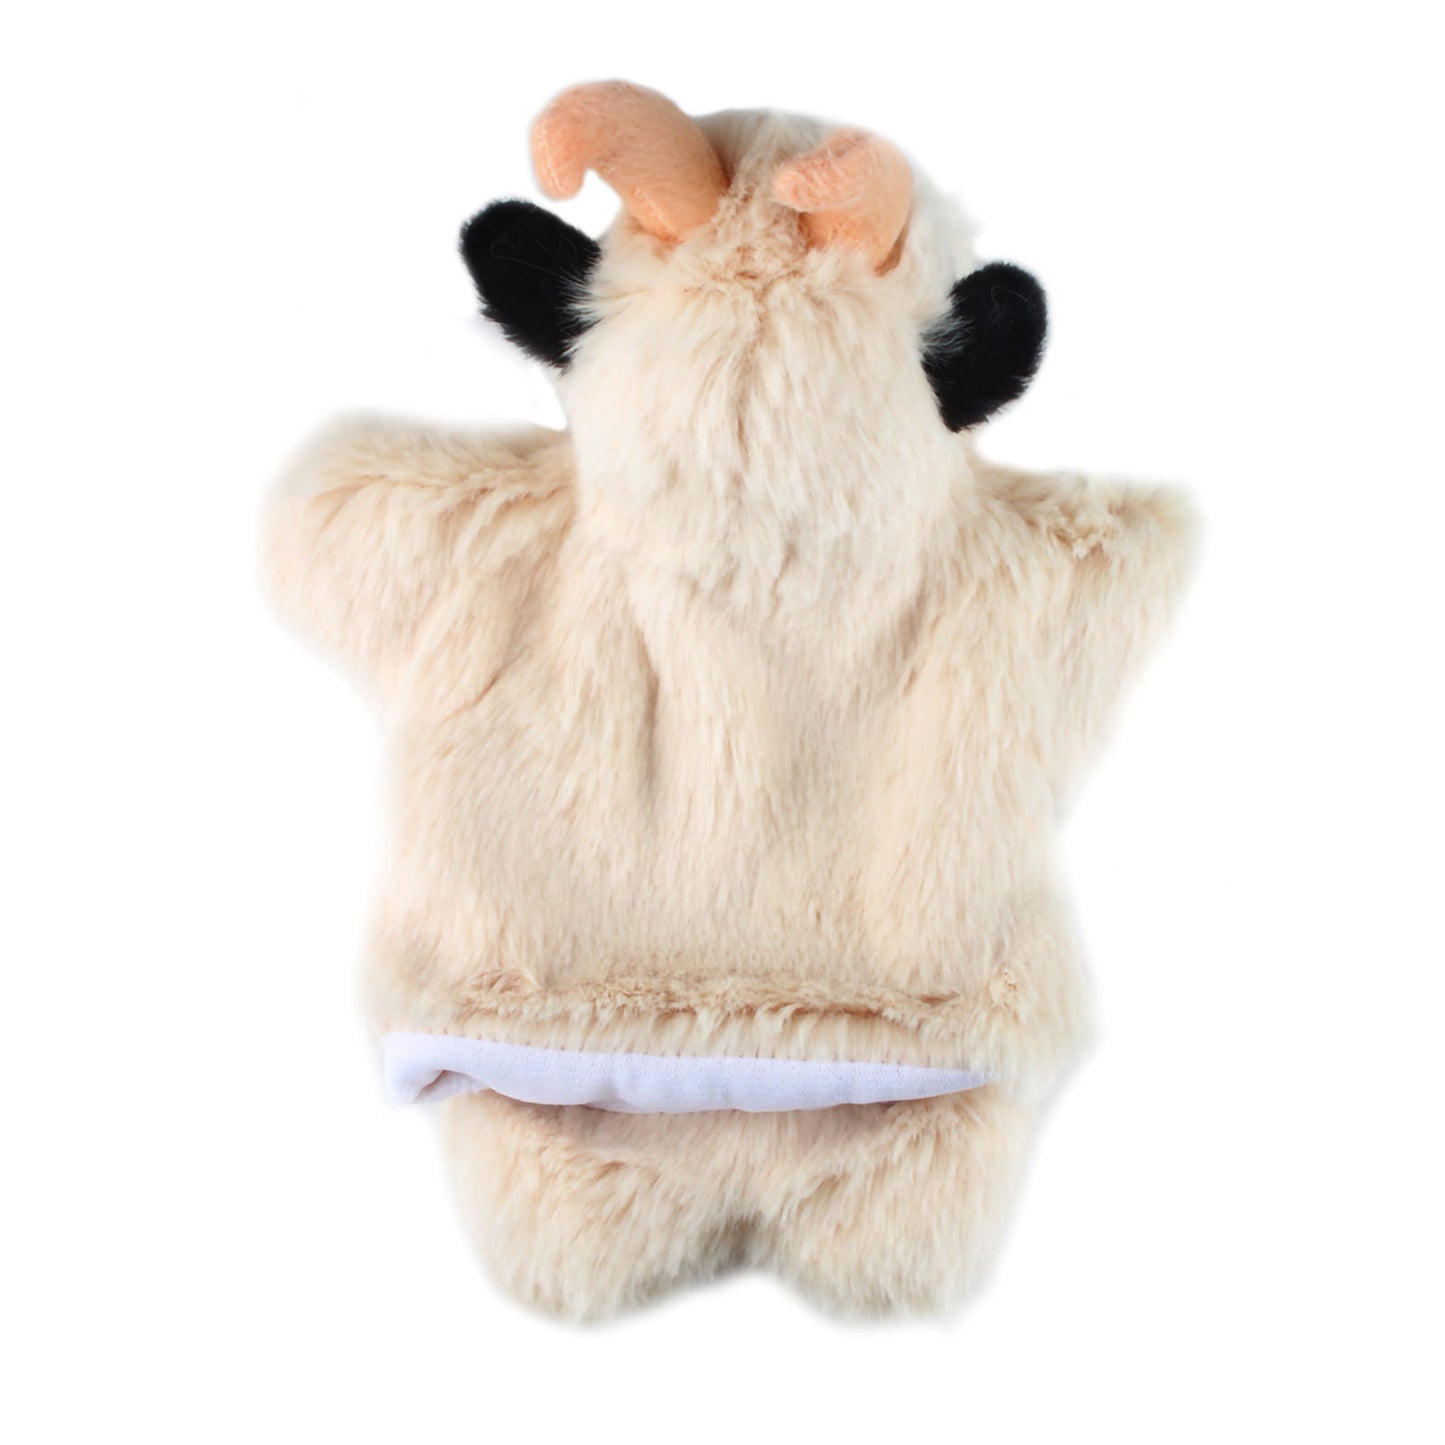 Andux Hand Puppet Soft Stuffed Animal Toy (SO-18 Old Goat)